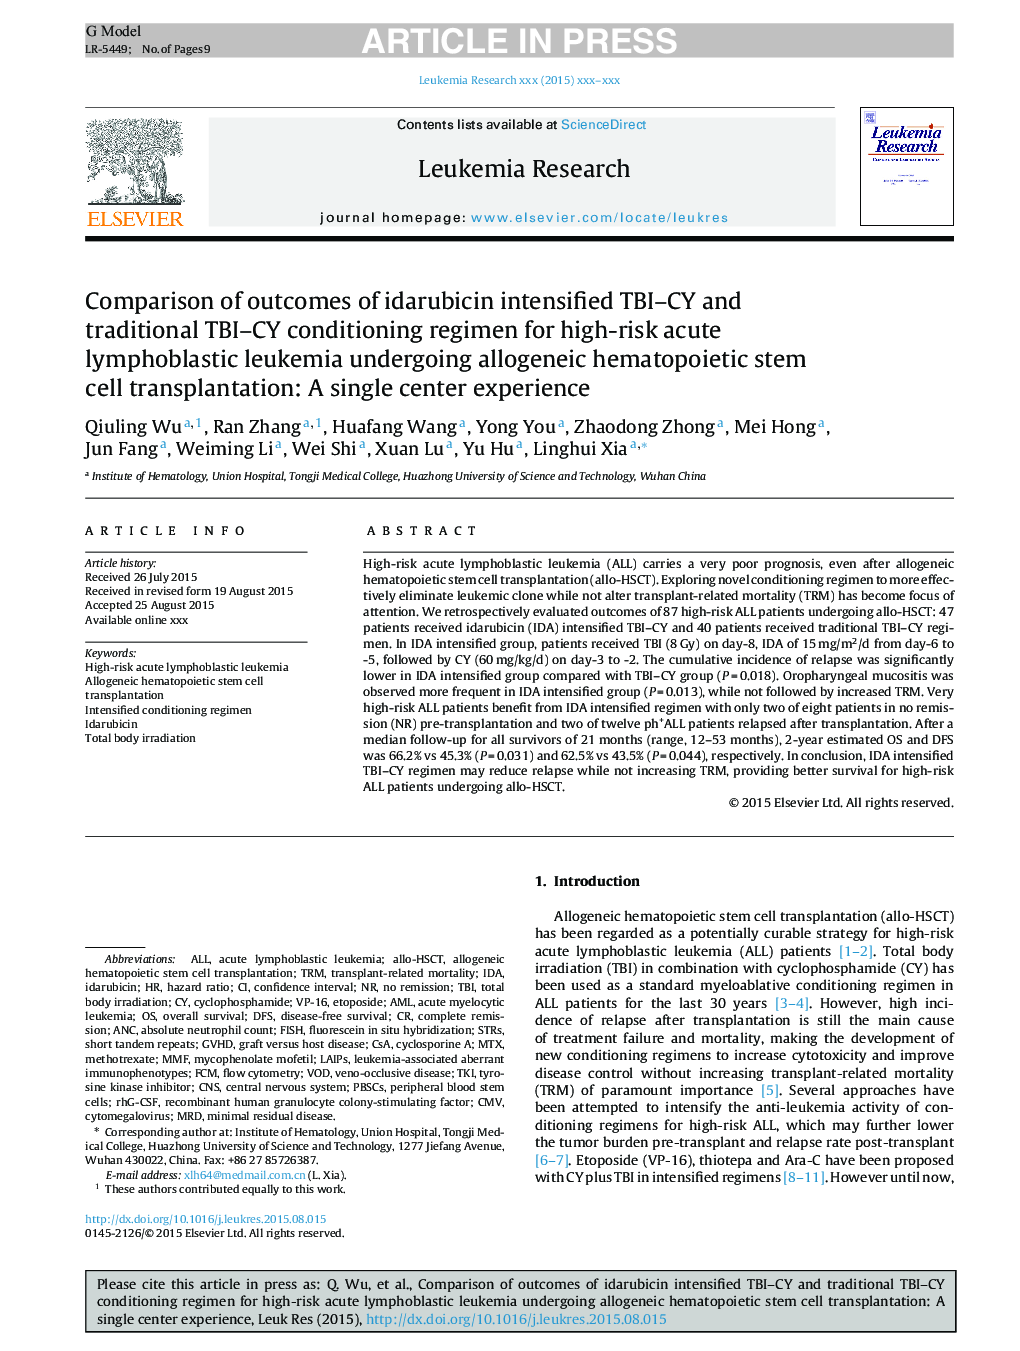 Comparison of outcomes of idarubicin intensified TBI-CY and traditional TBI-CY conditioning regimen for high-risk acute lymphoblastic leukemia undergoing allogeneic hematopoietic stem cell transplantation: A single center experience